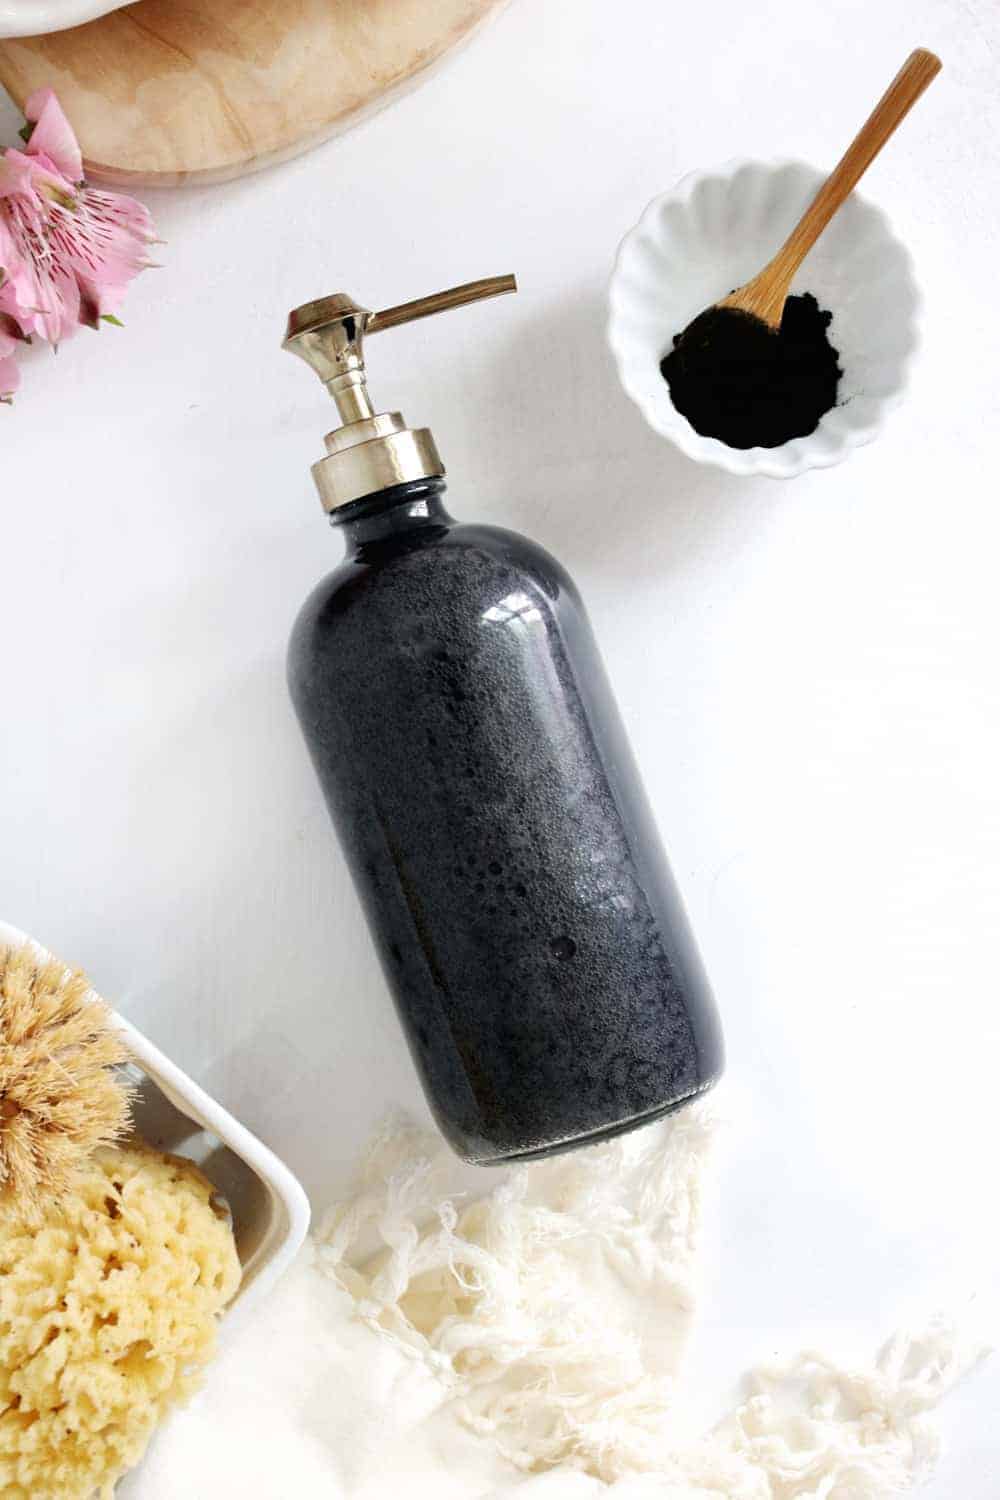 We're Kind of Obsessed With This DIY Charcoal Hand Soap